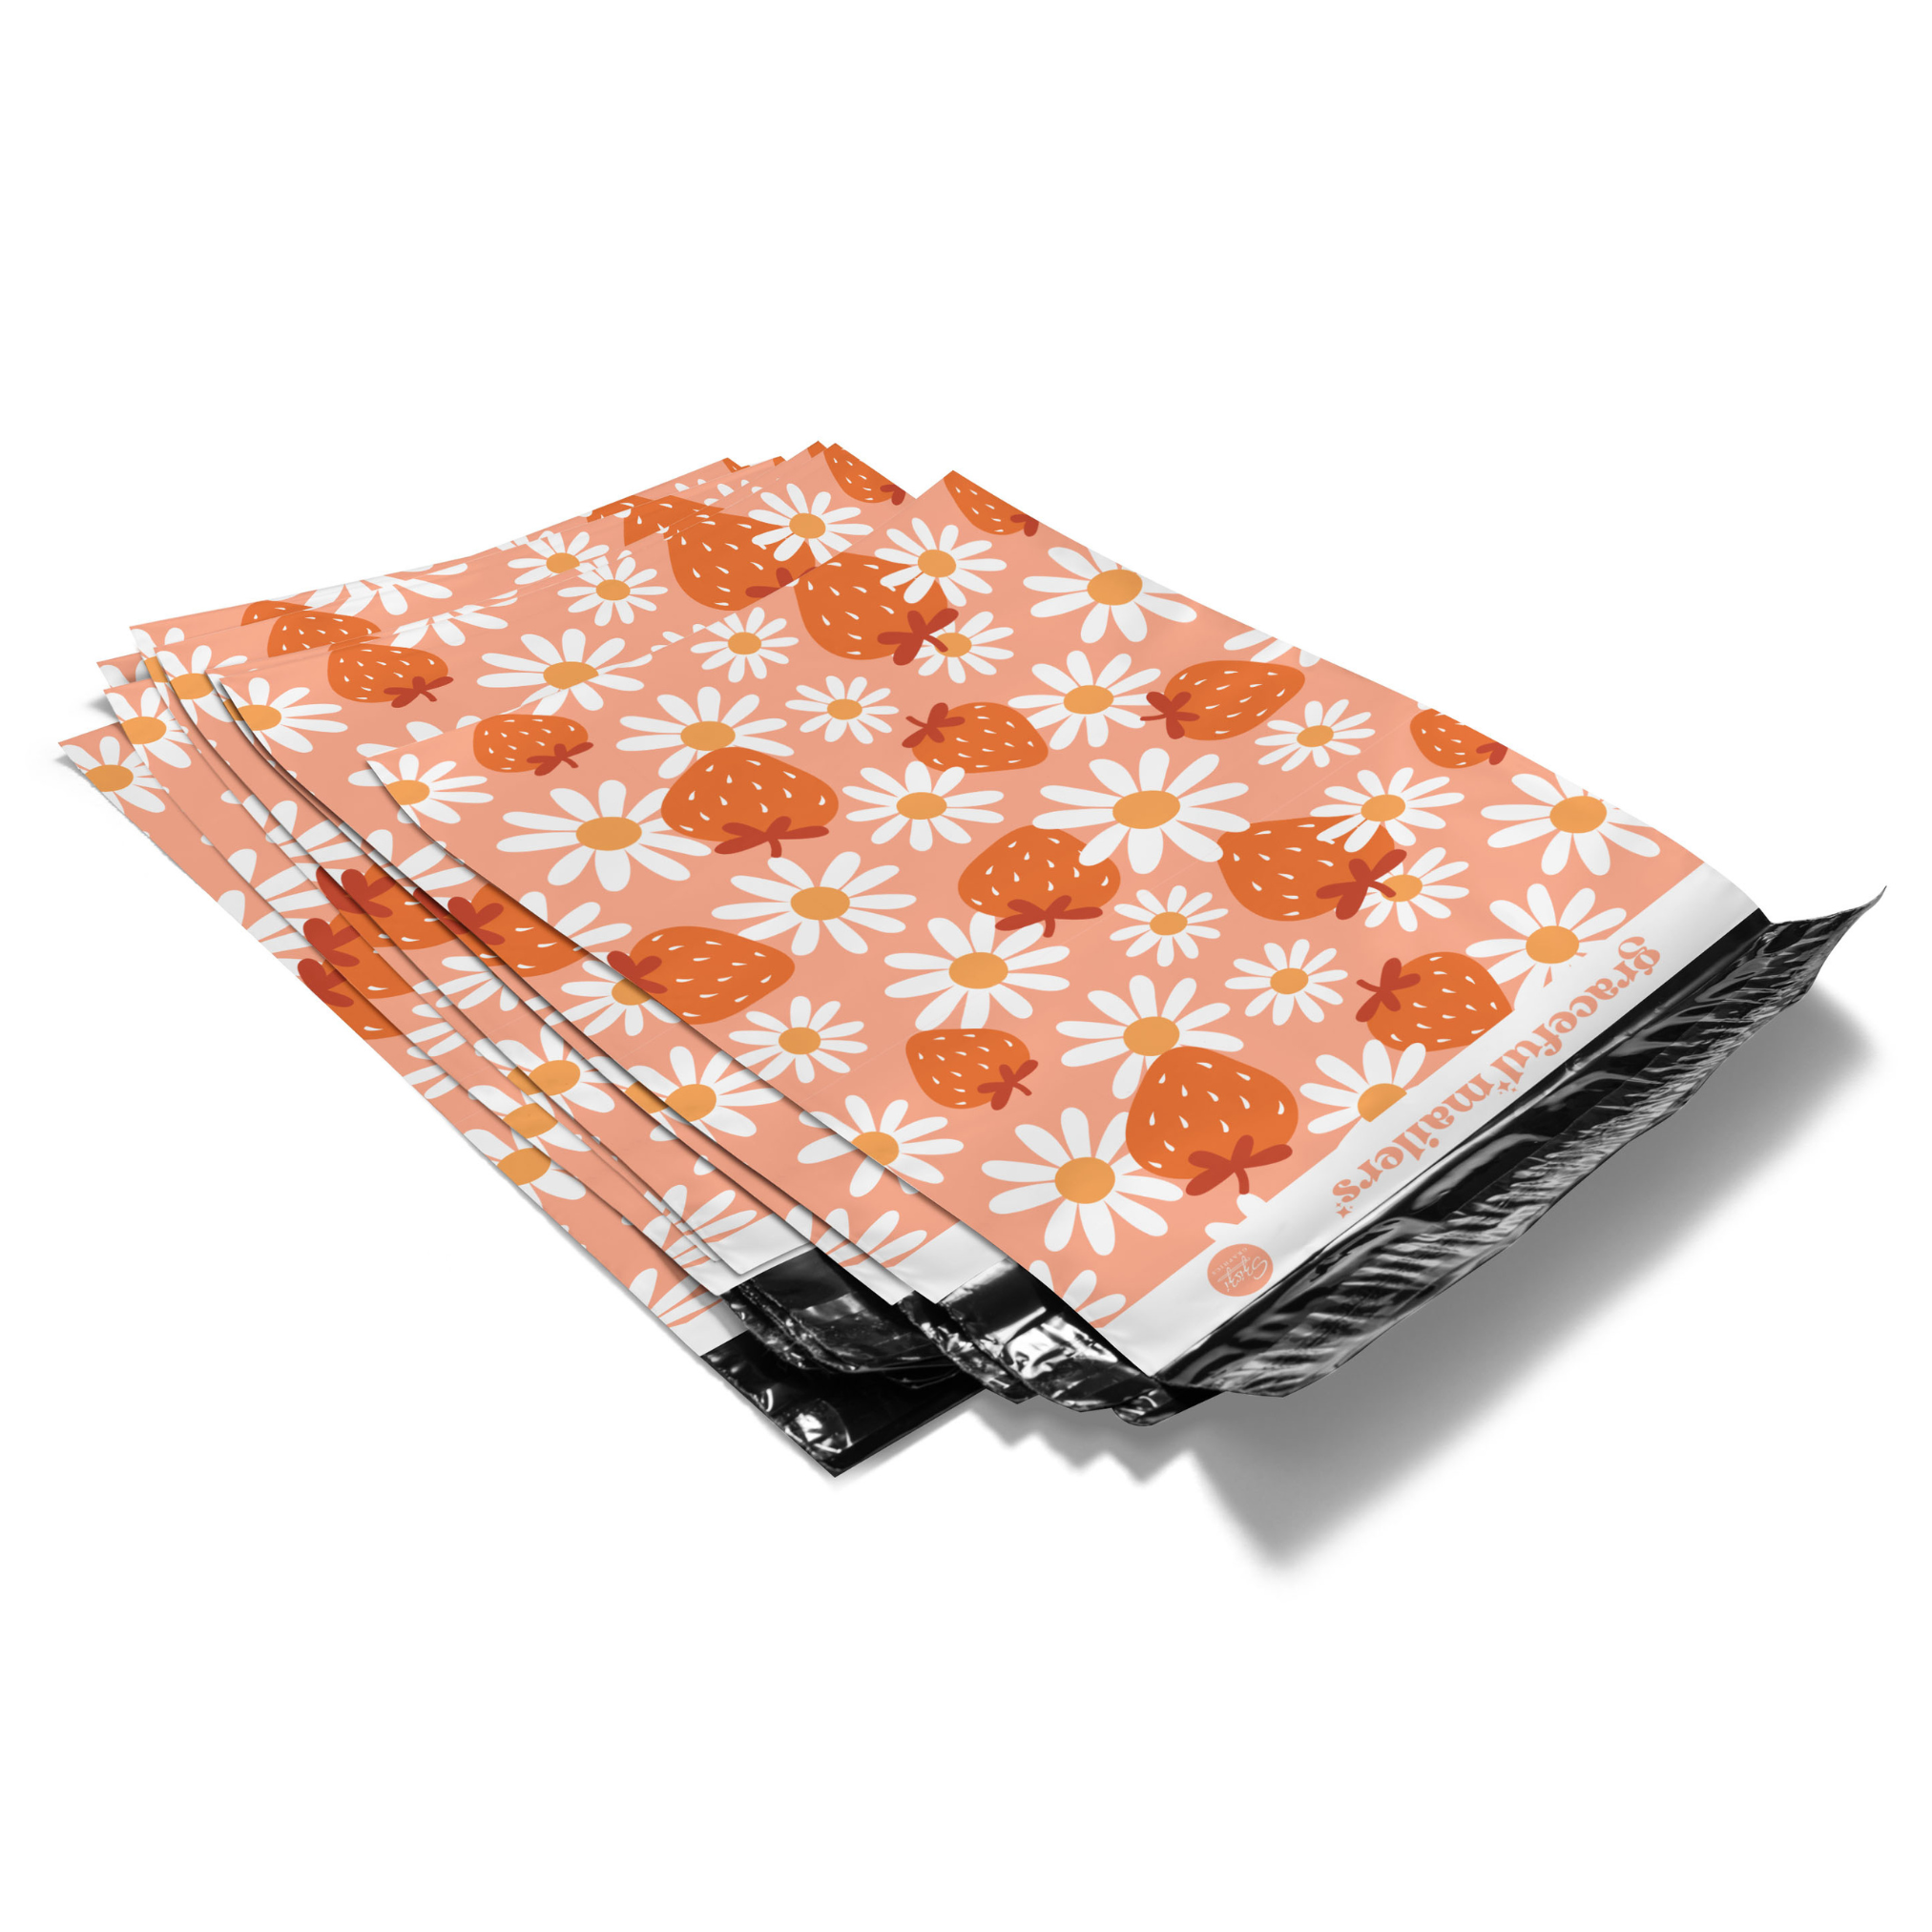 Daisy Berries - 10x13 Poly Mailer